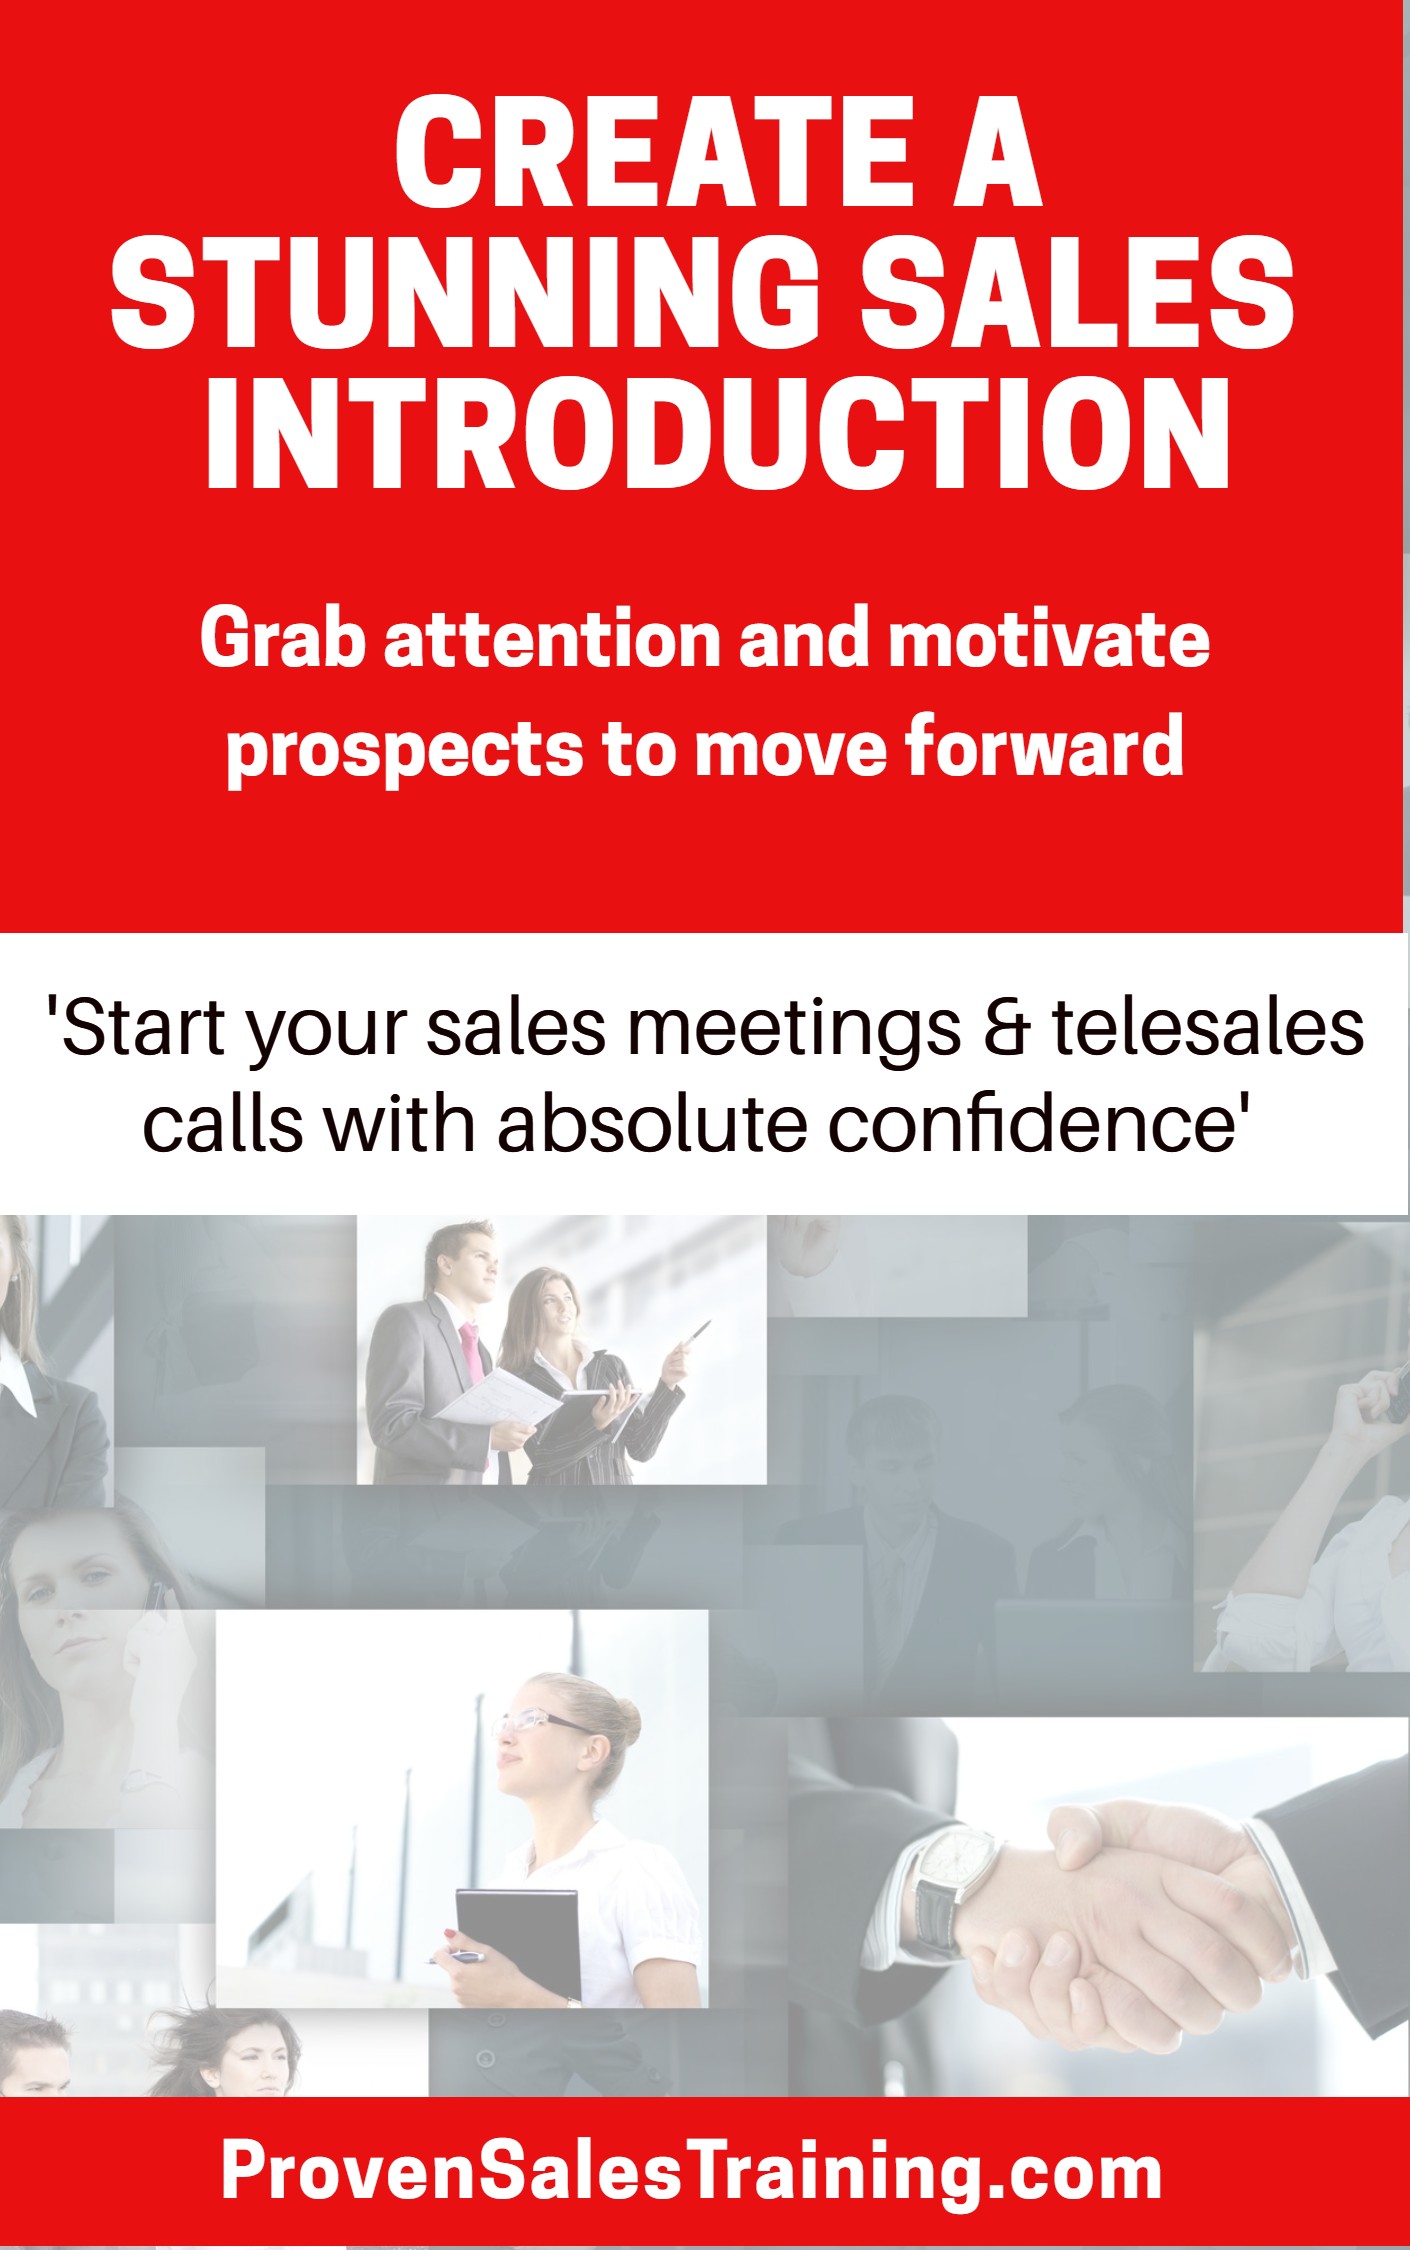 Free sales training eBook on creating a stunning sales introduction